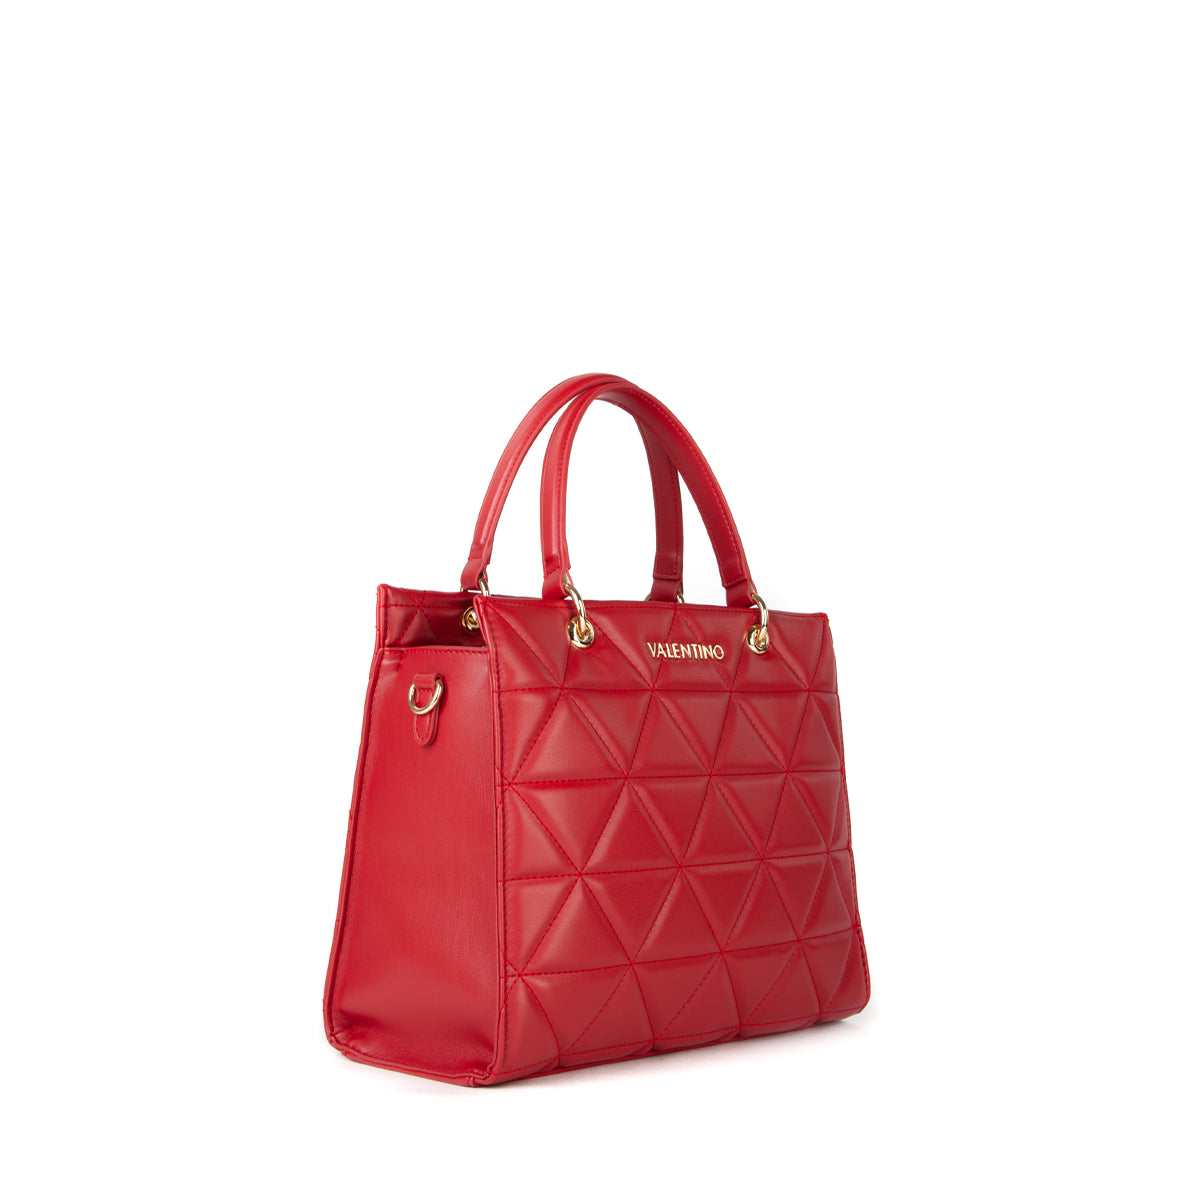 Sac Cabas Carnaby Valentino VBS7LO02 Rosso